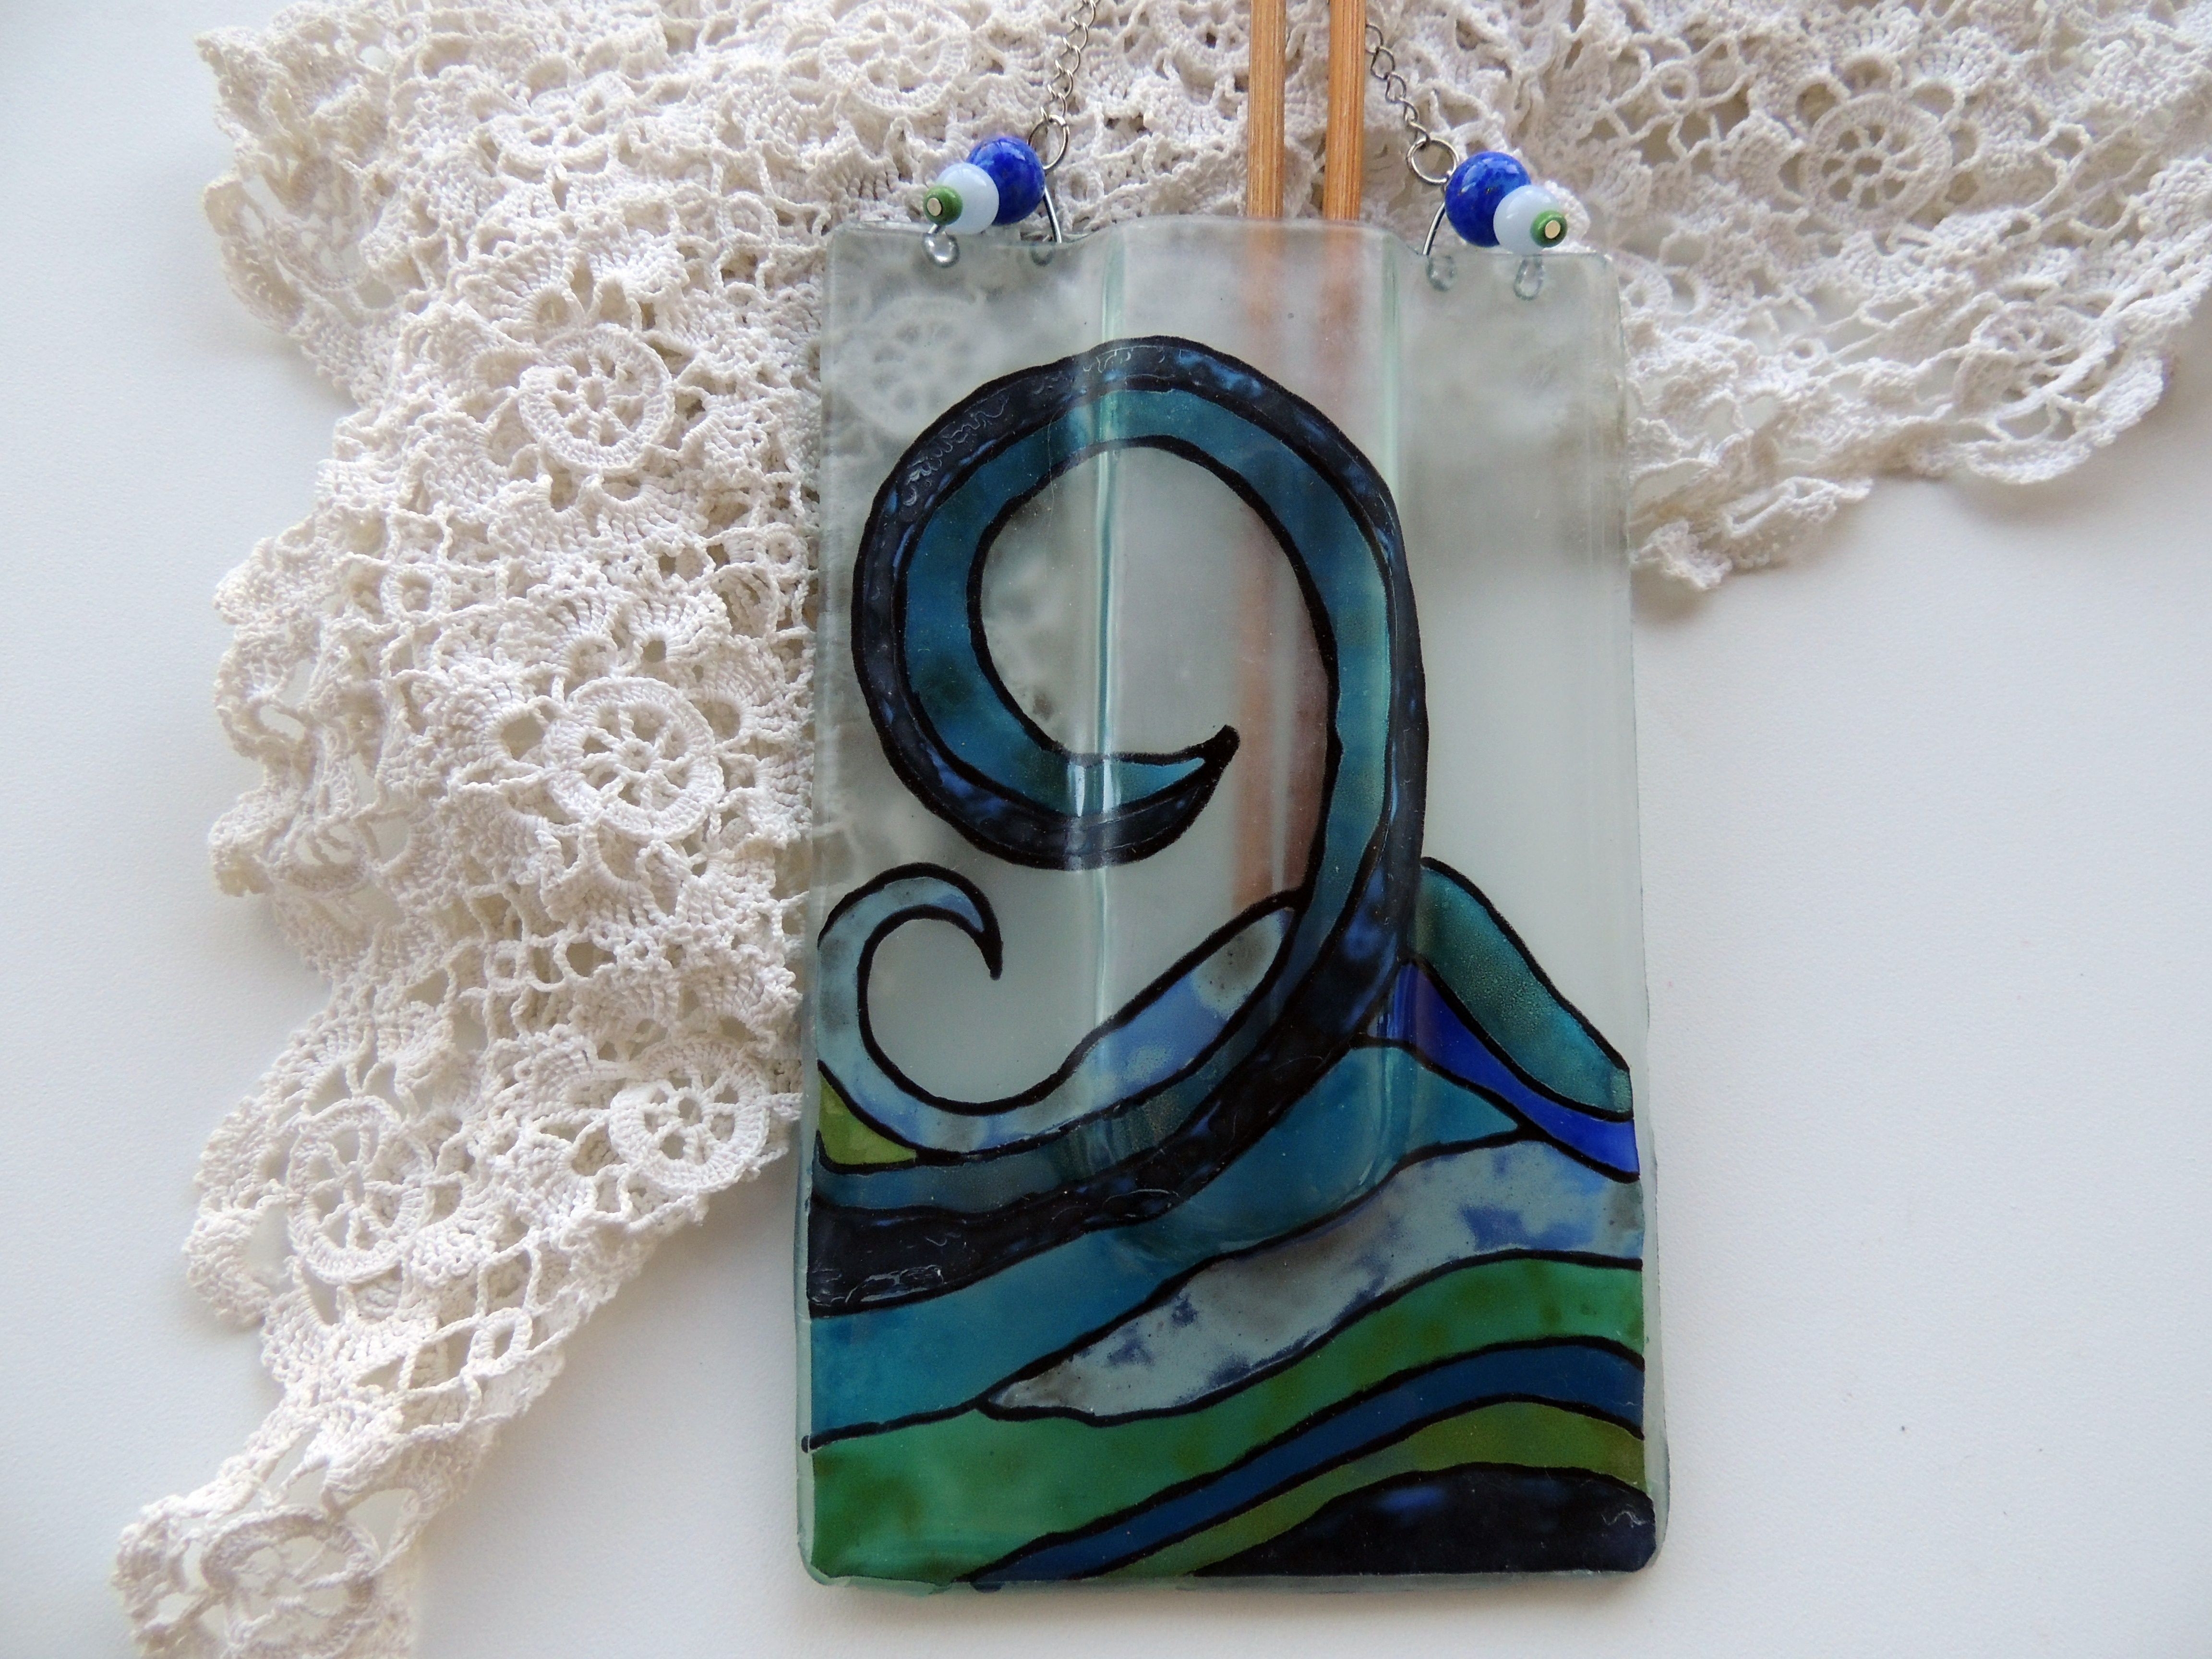 19 attractive Wall Pocket Vase 2023 free download wall pocket vase of fused glass pocket vasepainted fused vasepainted wall vasewall within fused glass pocket vasepainted fused vasepainted wall vasewall painted sea